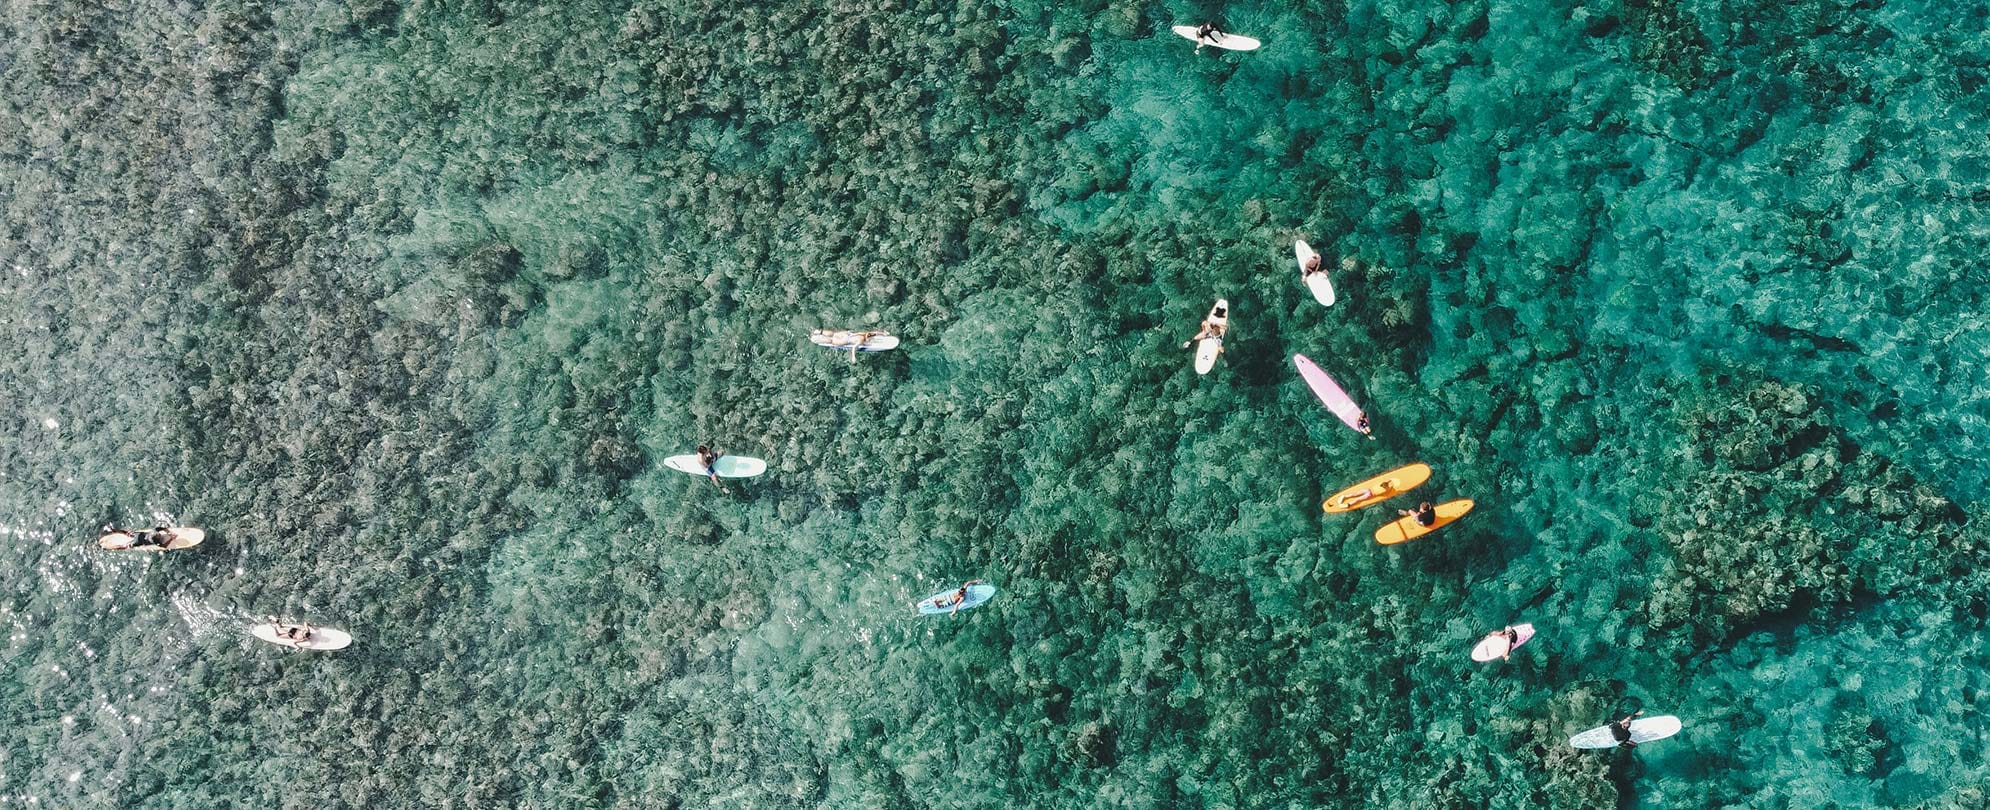 Aerial image of surfers sitting on their surfboards in the emerald-green waters surrounding Kona, Hawaii.